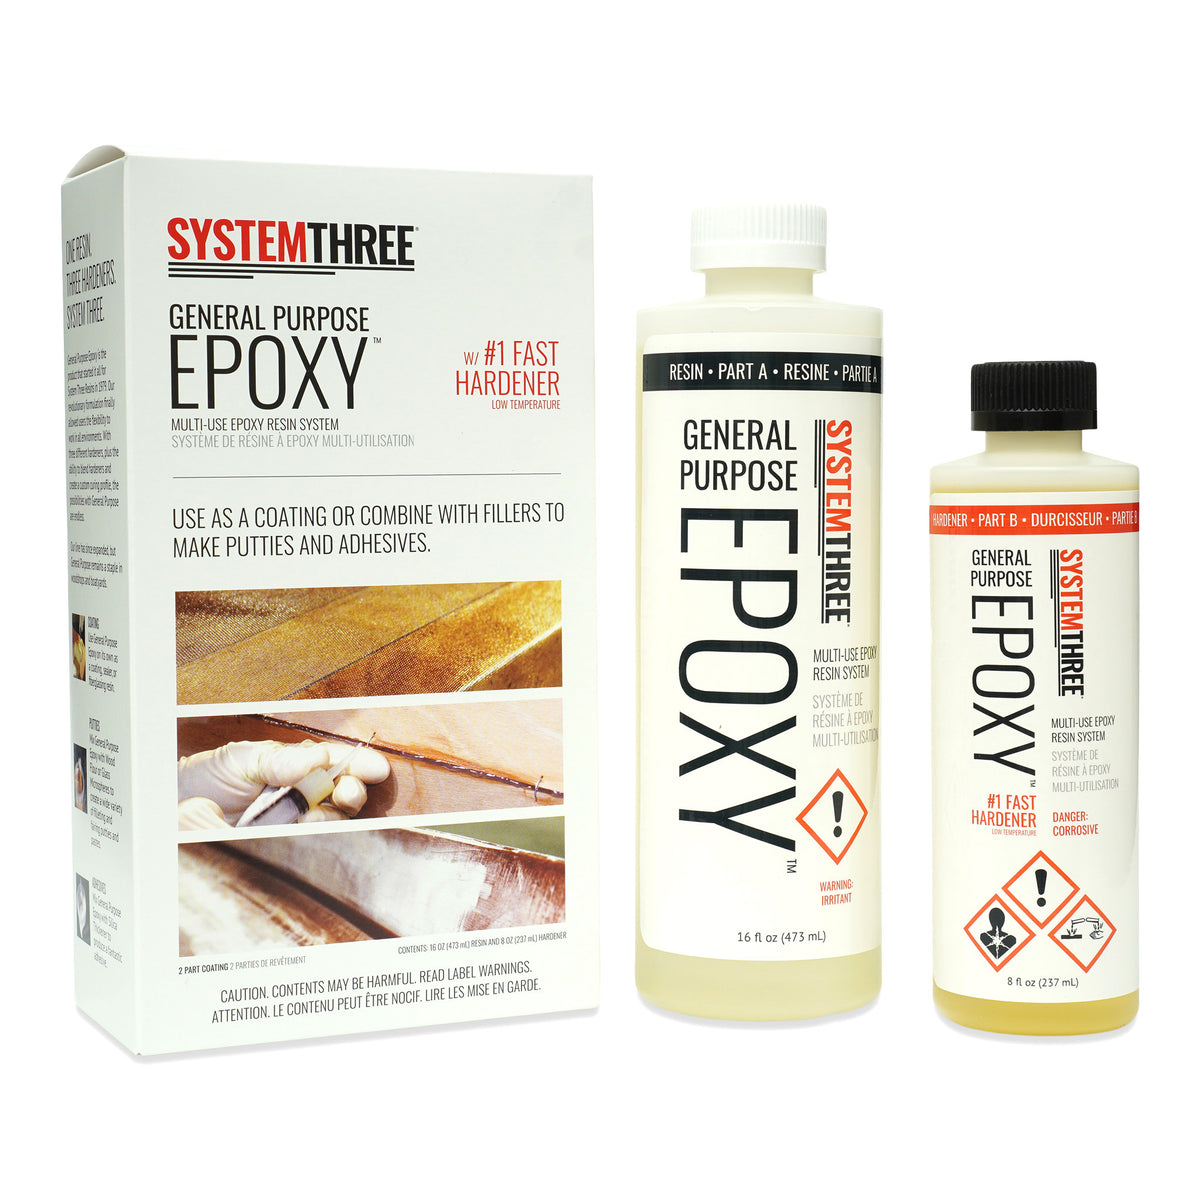 Max General Purpose Grade Epoxy Resin System - 48 Ounce Kit - Adhesive, Coating, Wood Sealing, Arts & Crafts, Hobby Casting and Fiberglassing